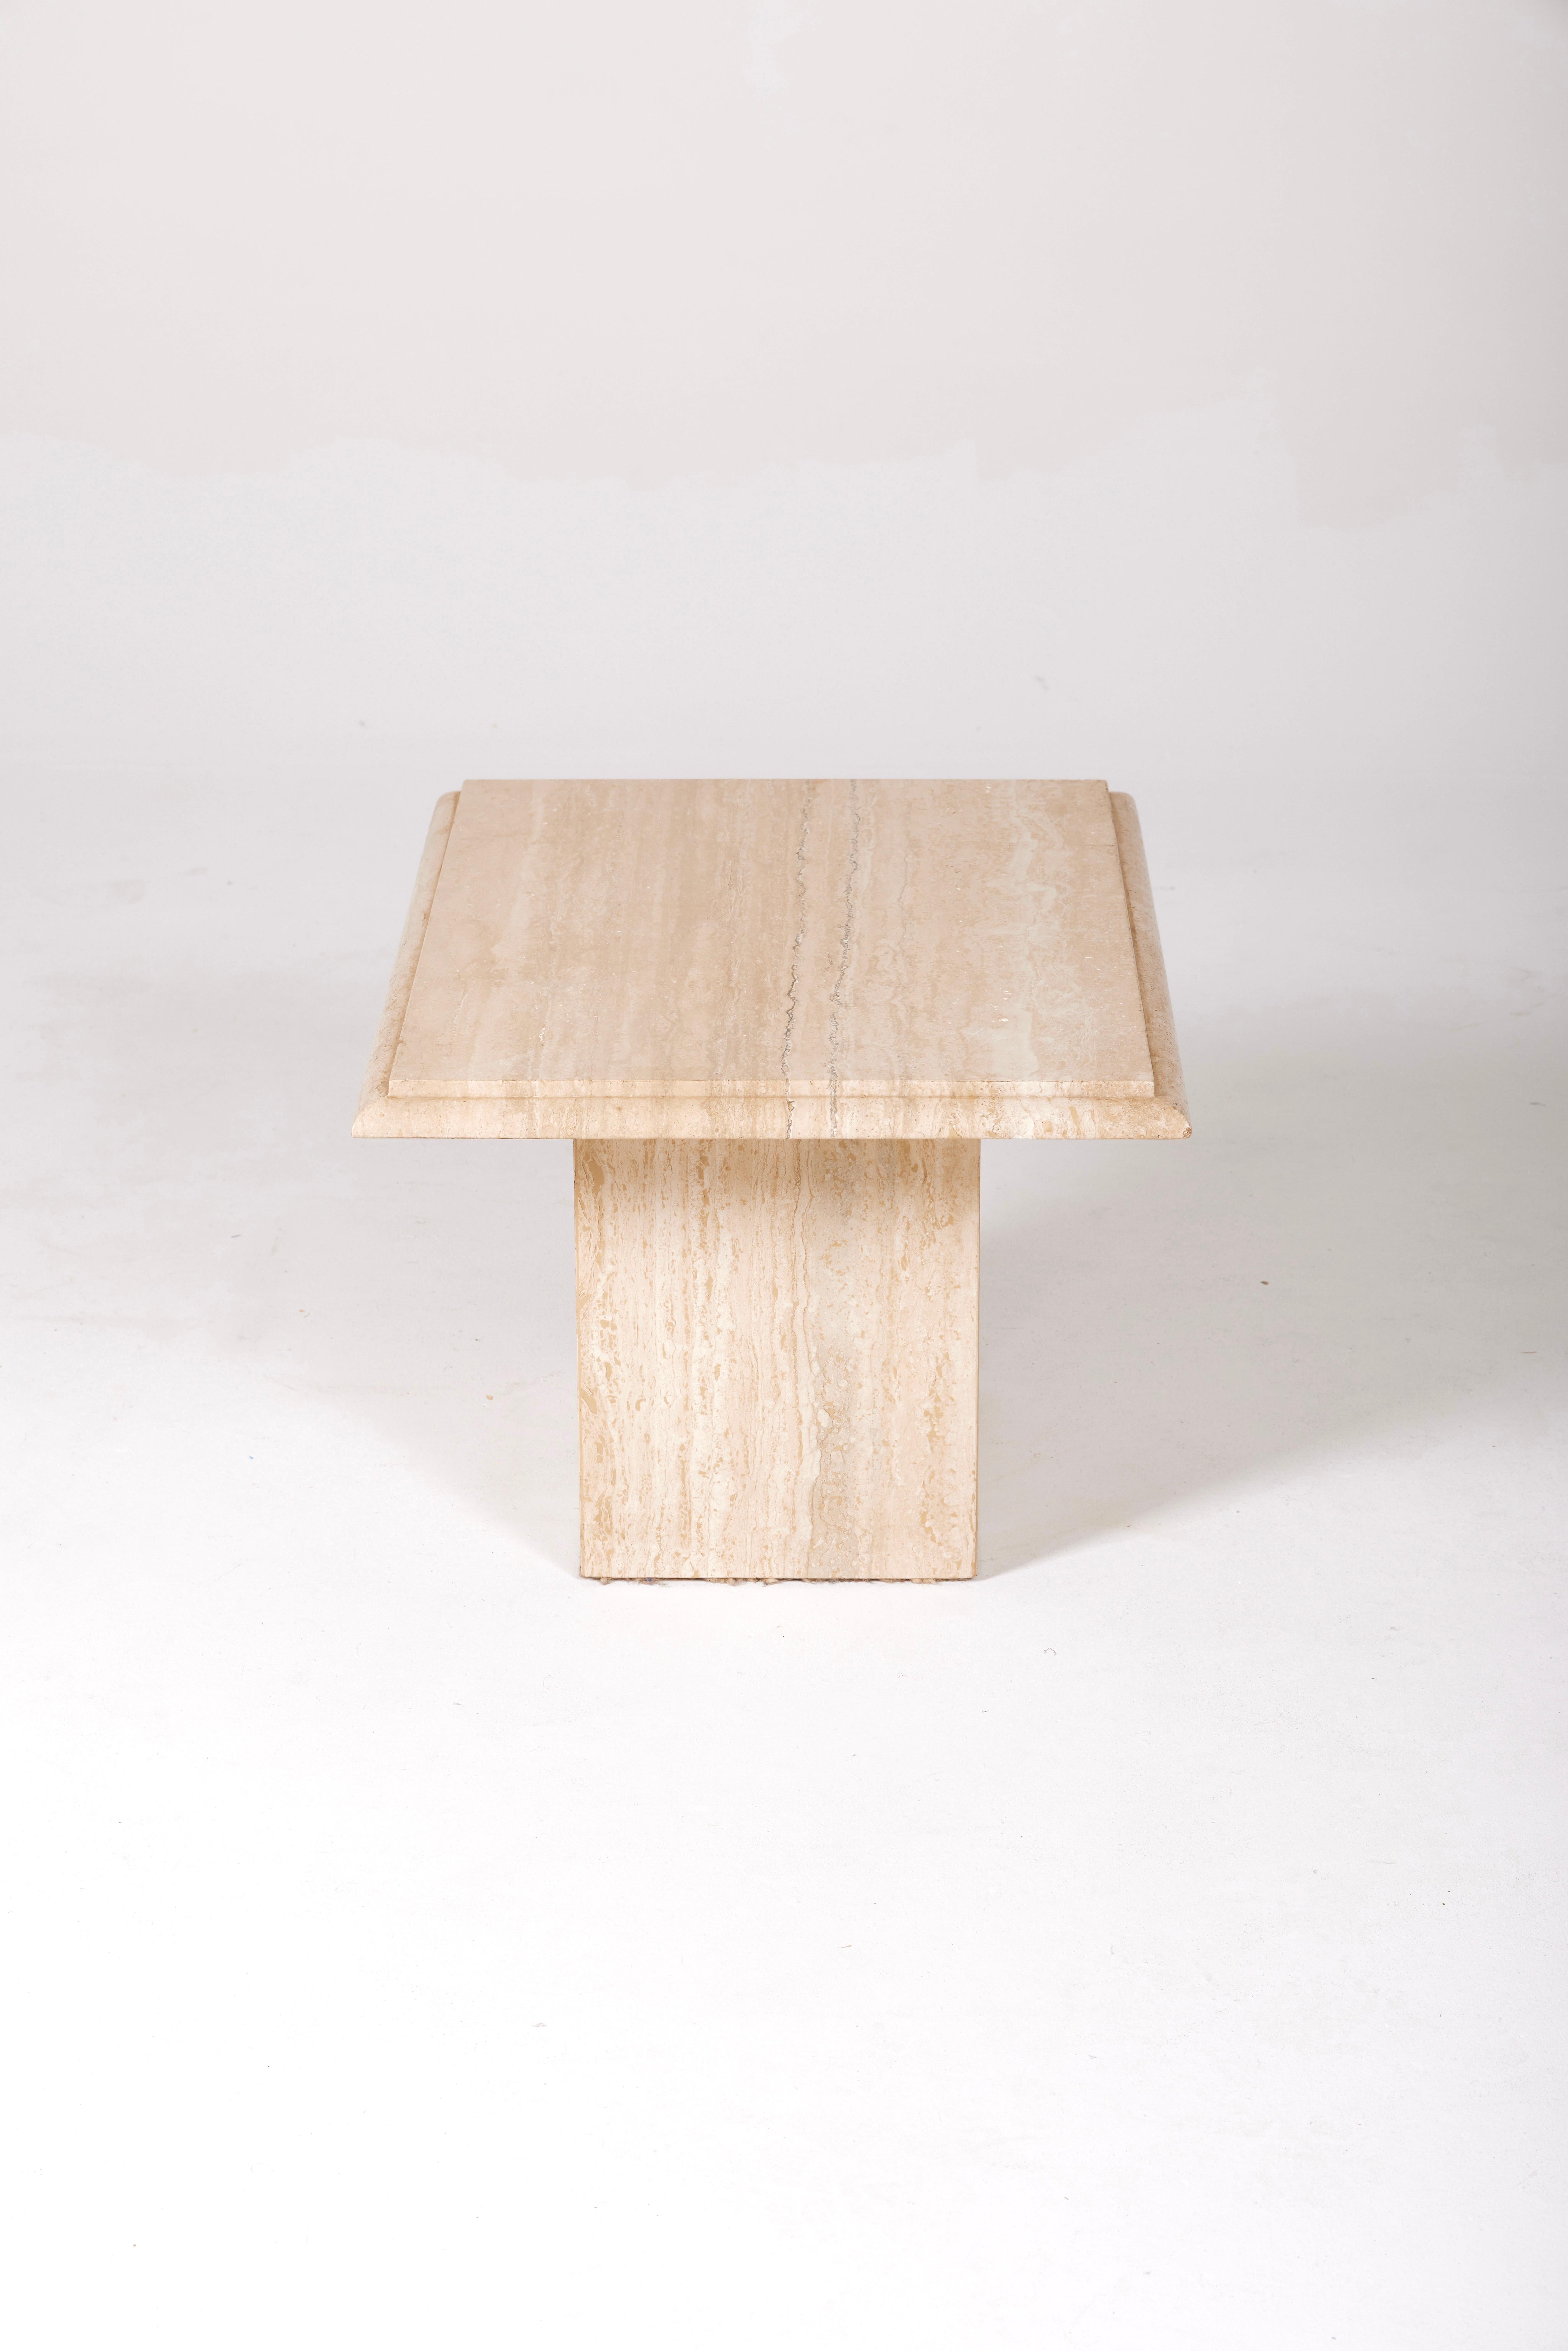 Rectangular travertine side table or coffee table from the 1970s. The top and base can be separated. Timeless, travertine is a material that complements pieces from the 1950s to the 1980s.
LP1256